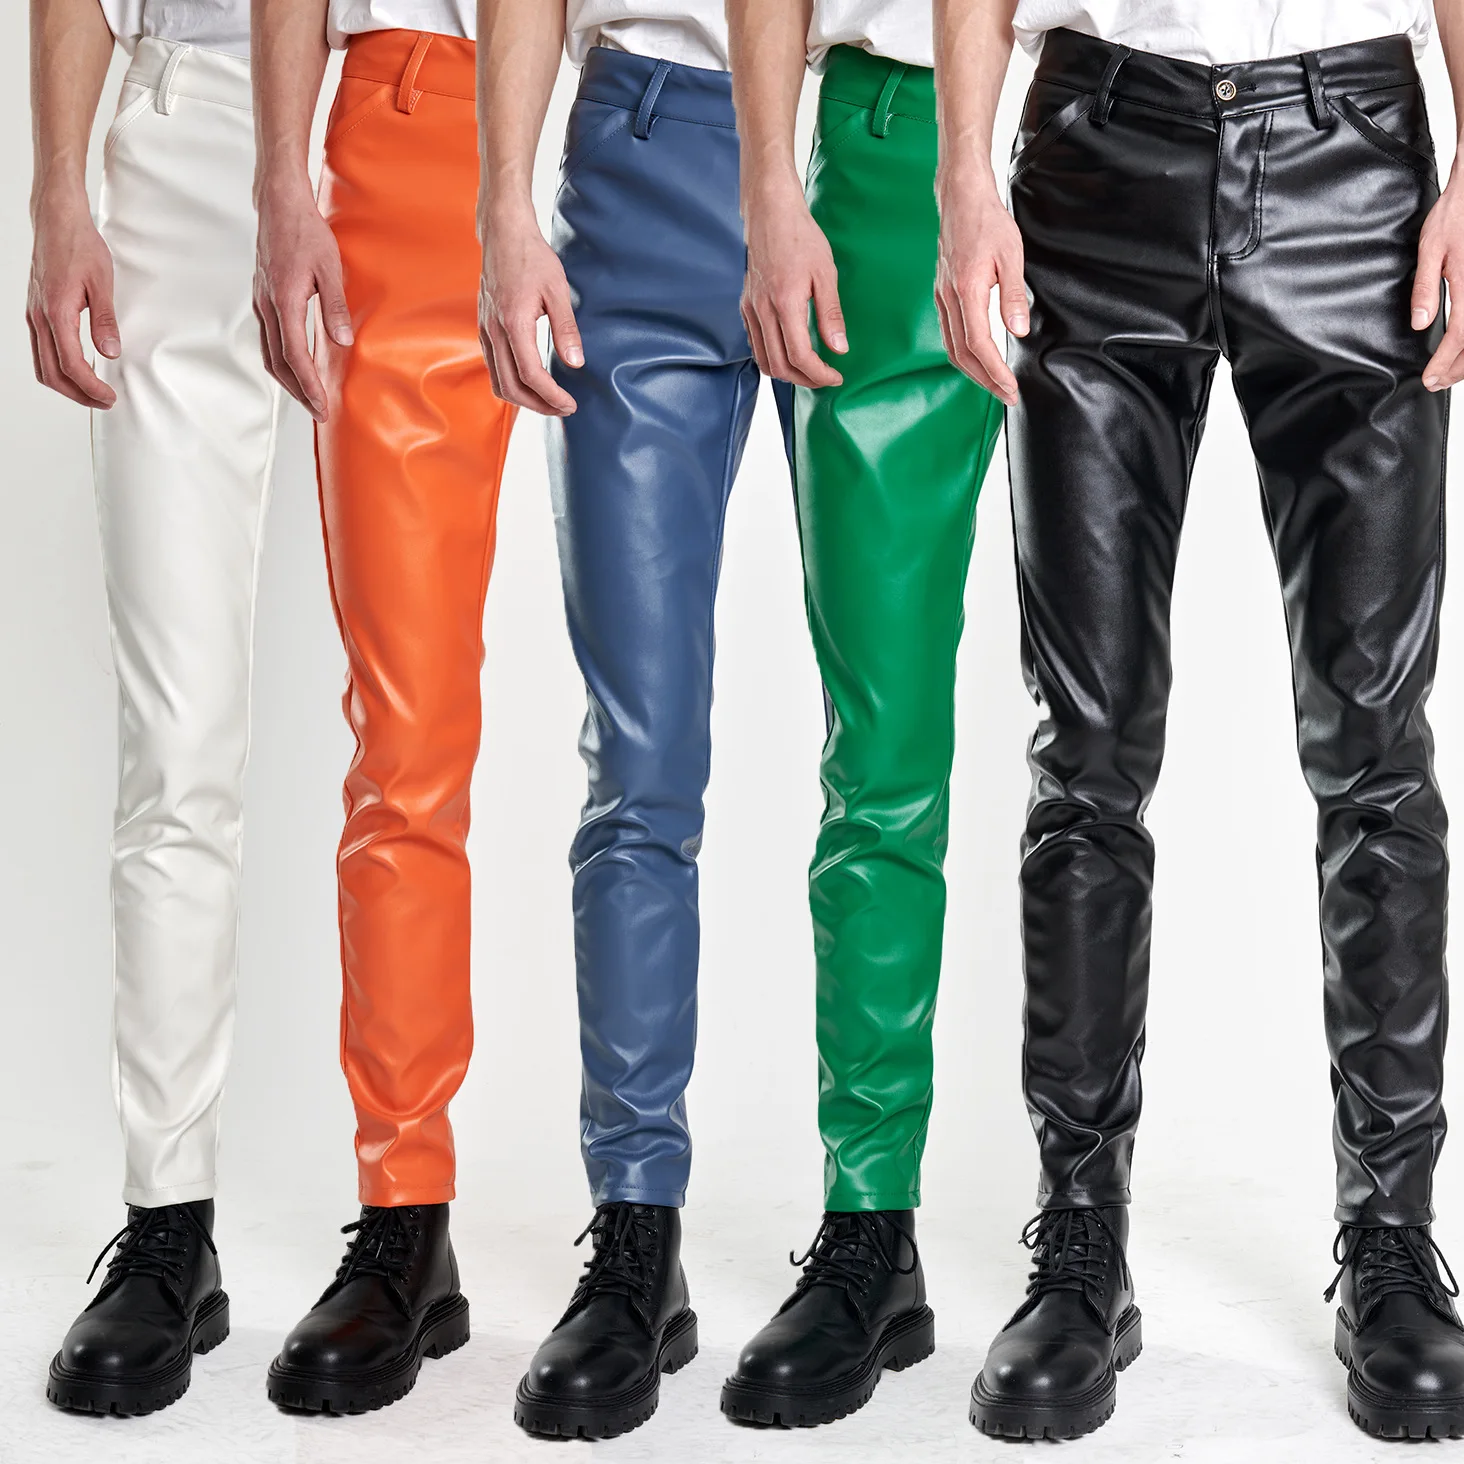  2023 Brand Men 5 Color Leather Pants Skinny Fit Elastic Fashion PU Leather Trousers Party & Dance Pants Thin Drop Shipping